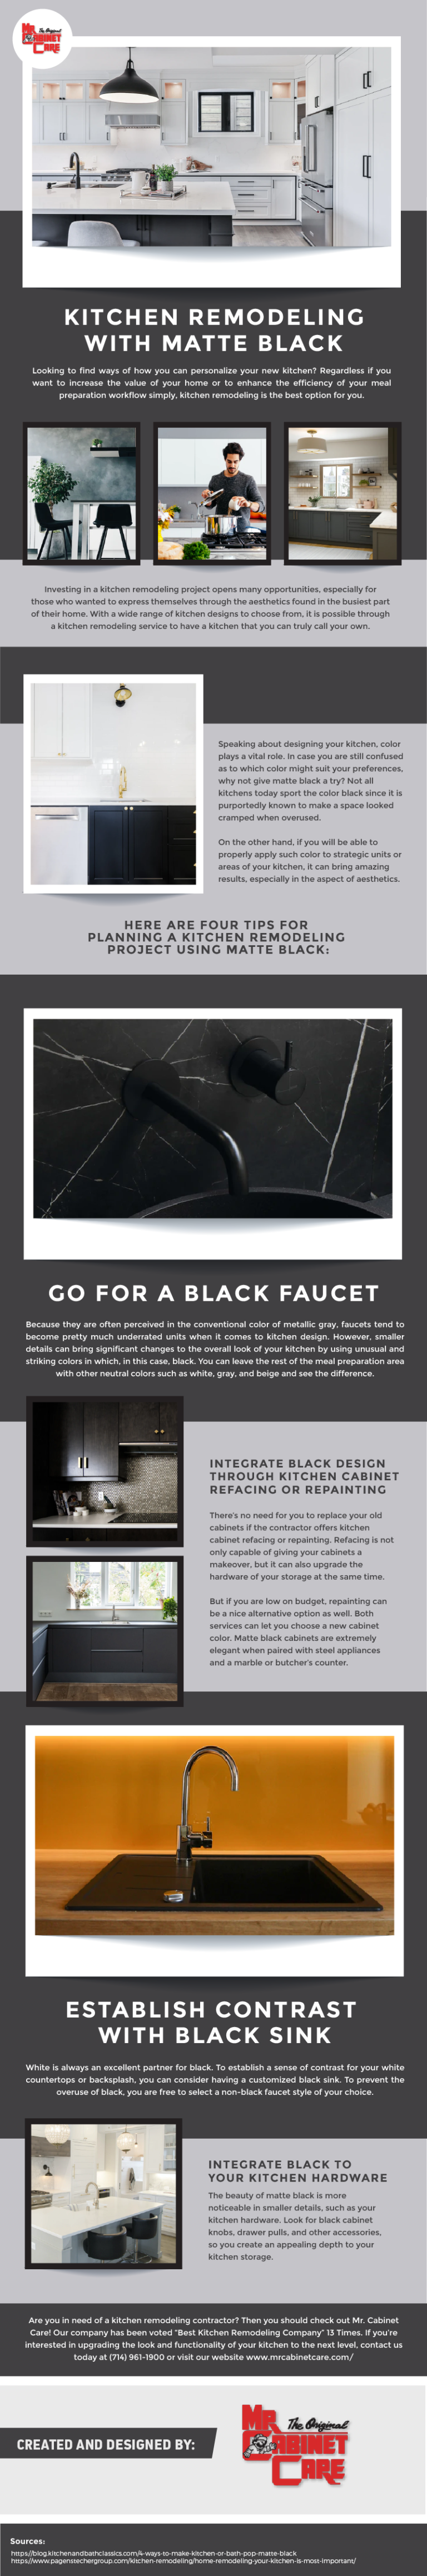 Kitchen Remodeling with Matte Black – Infographic